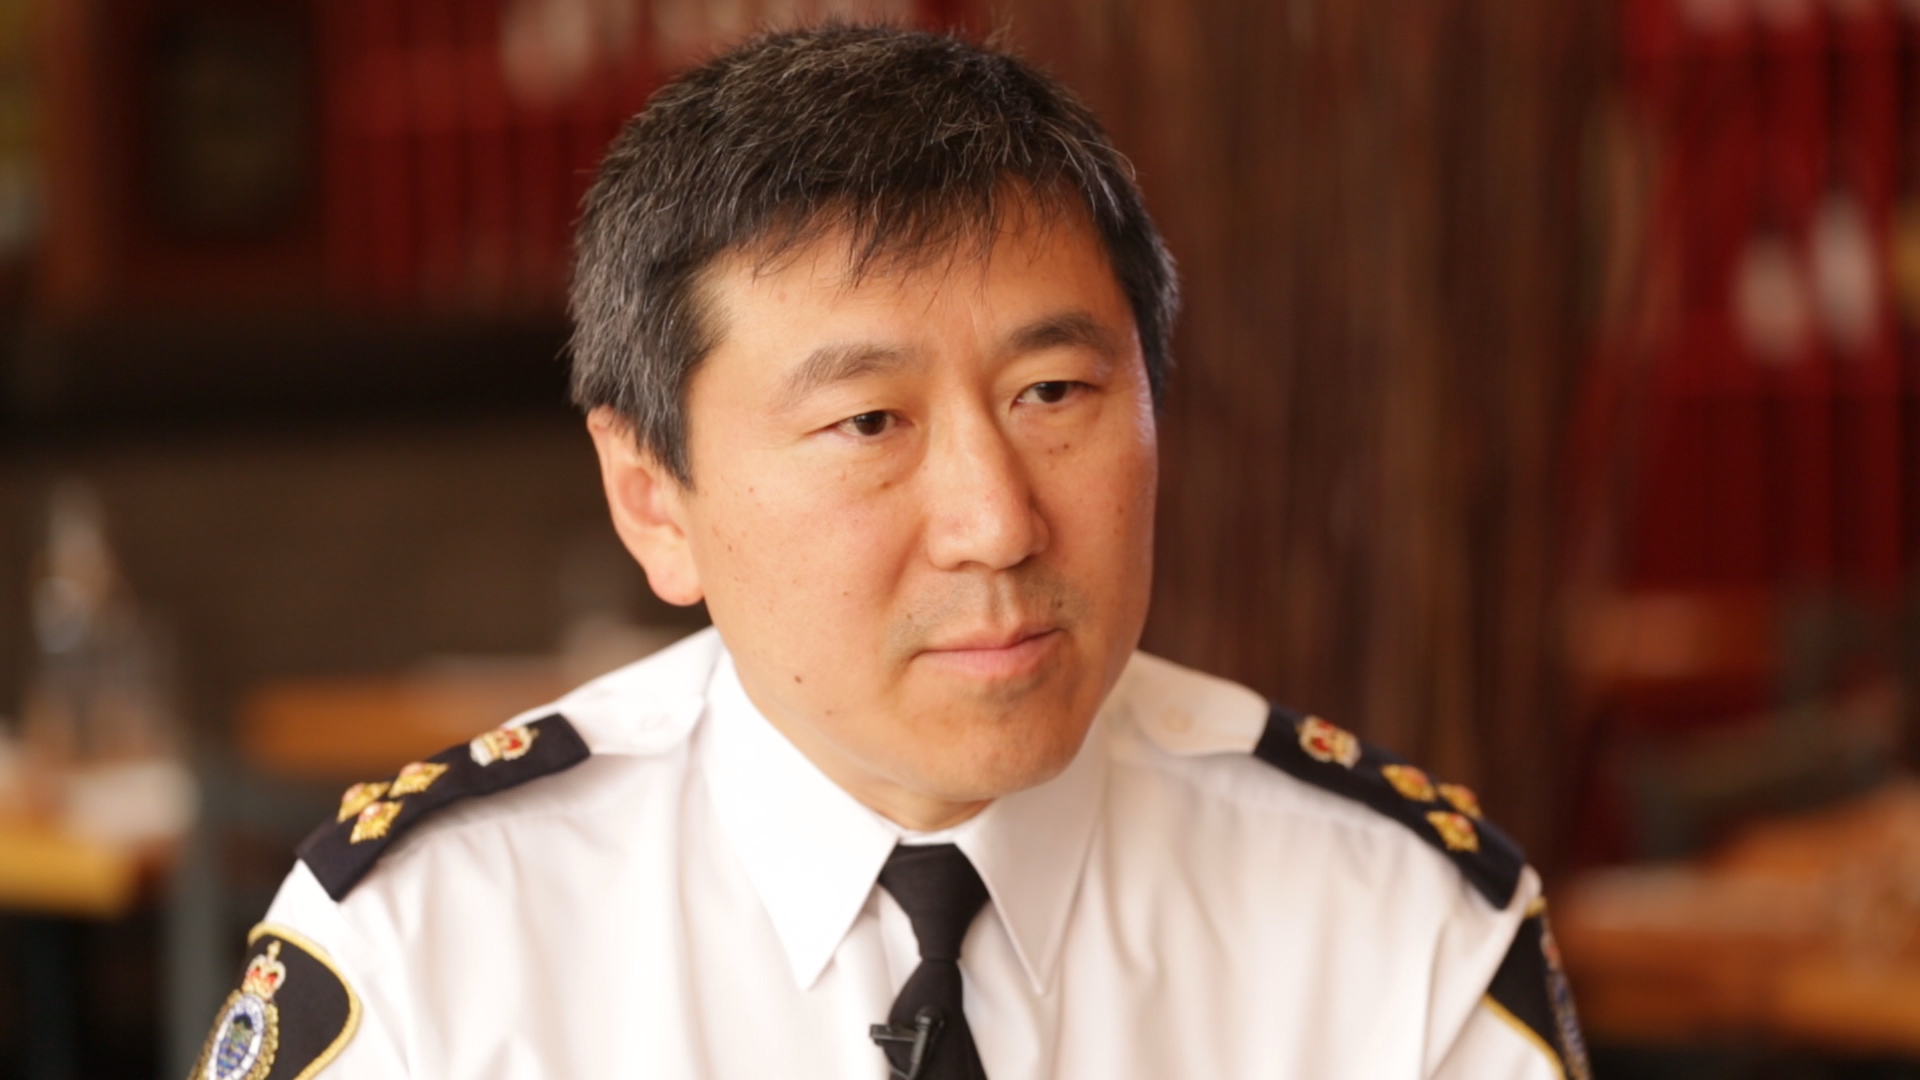 Conversations that Matter - Episode 10 - Vancouver Police Chief Jim Chu on Mental Health, Addiction and Homelessness